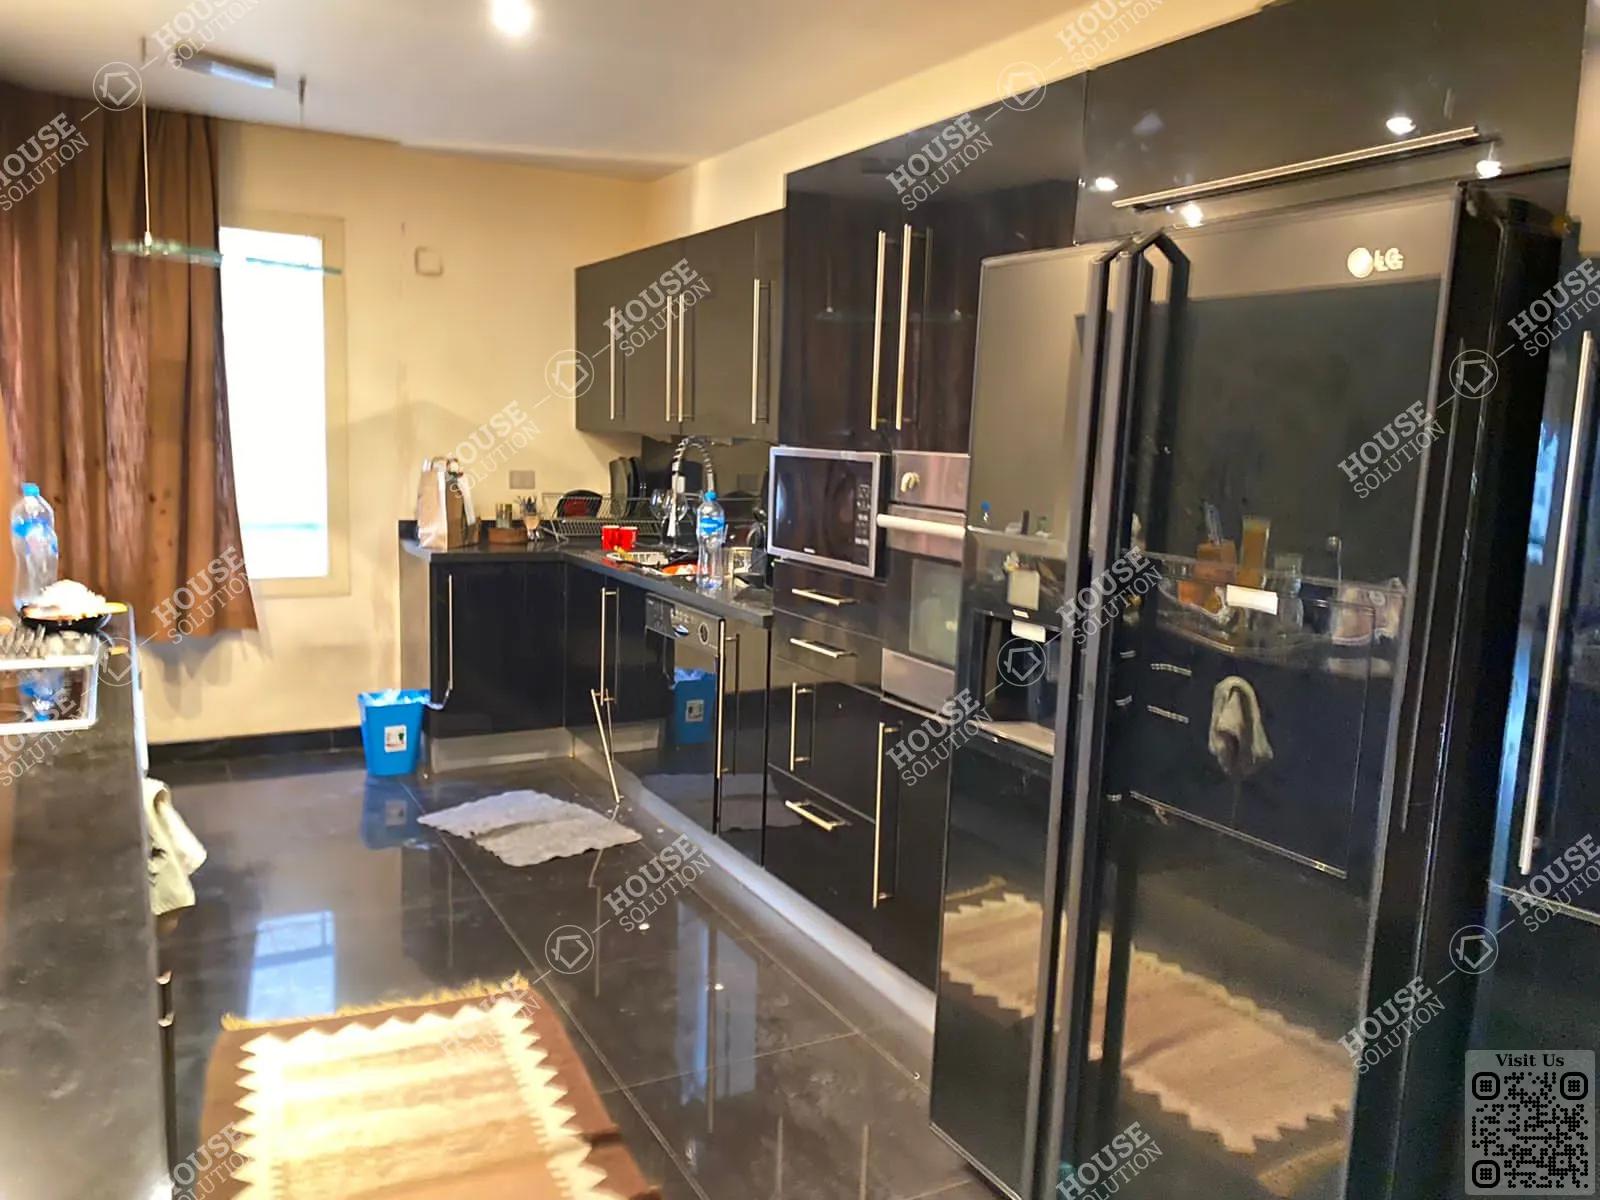 KITCHEN  @ Apartments For Rent In Maadi Maadi Degla Area: 190 m² consists of 2 Bedrooms 2 Bathrooms Modern furnished 5 stars #5902-2